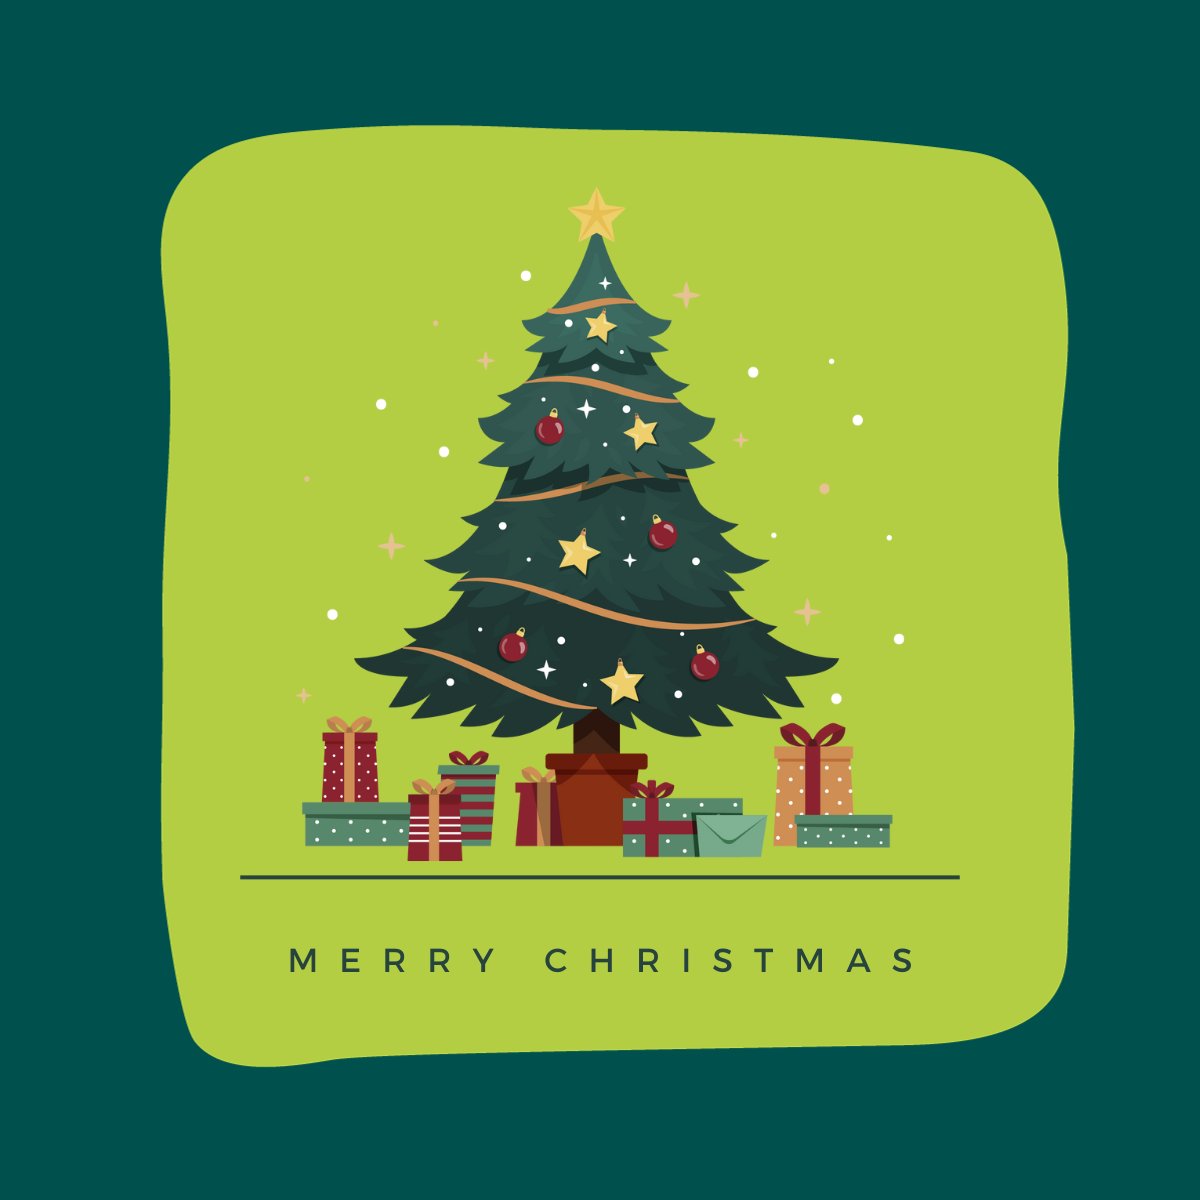 Wishing all of our network a very merry Christmas! 🎄 Thank you for your support in 2023. Enjoy a restful Christmas break!